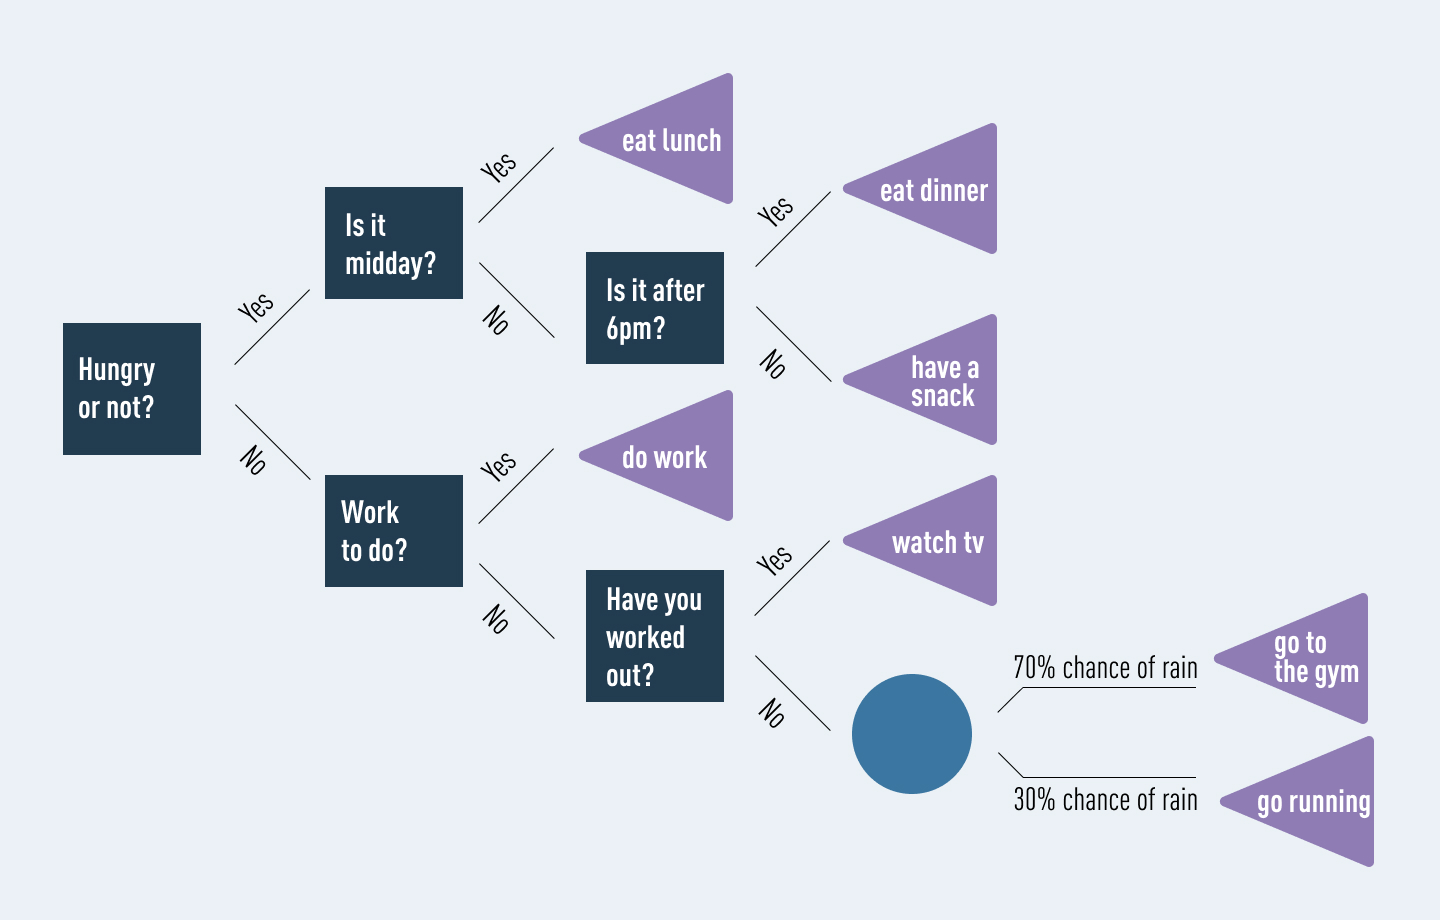 An example of a decision tree showing the possible outcomes you might follow based on whether or not you are hungry